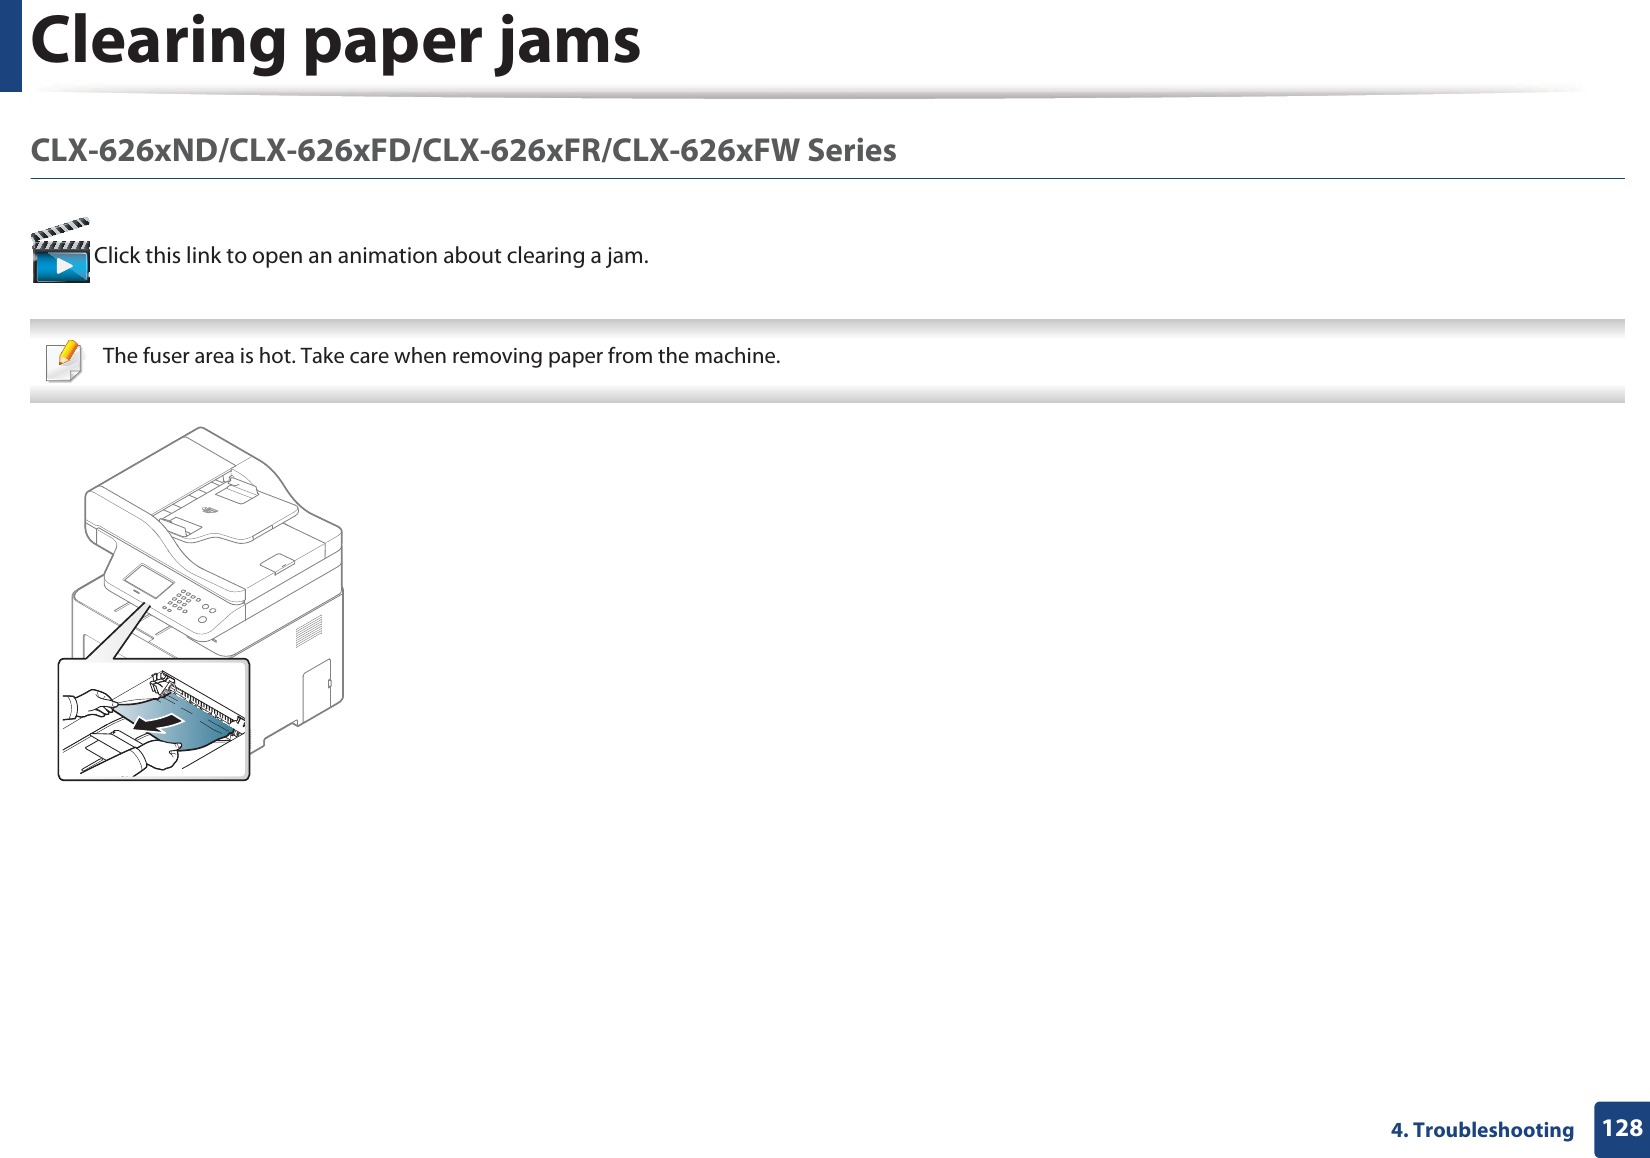 Clearing paper jams1284. TroubleshootingCLX-626xND/CLX-626xFD/CLX-626xFR/CLX-626xFW Series  Click this link to open an animation about clearing a jam. The fuser area is hot. Take care when removing paper from the machine. 